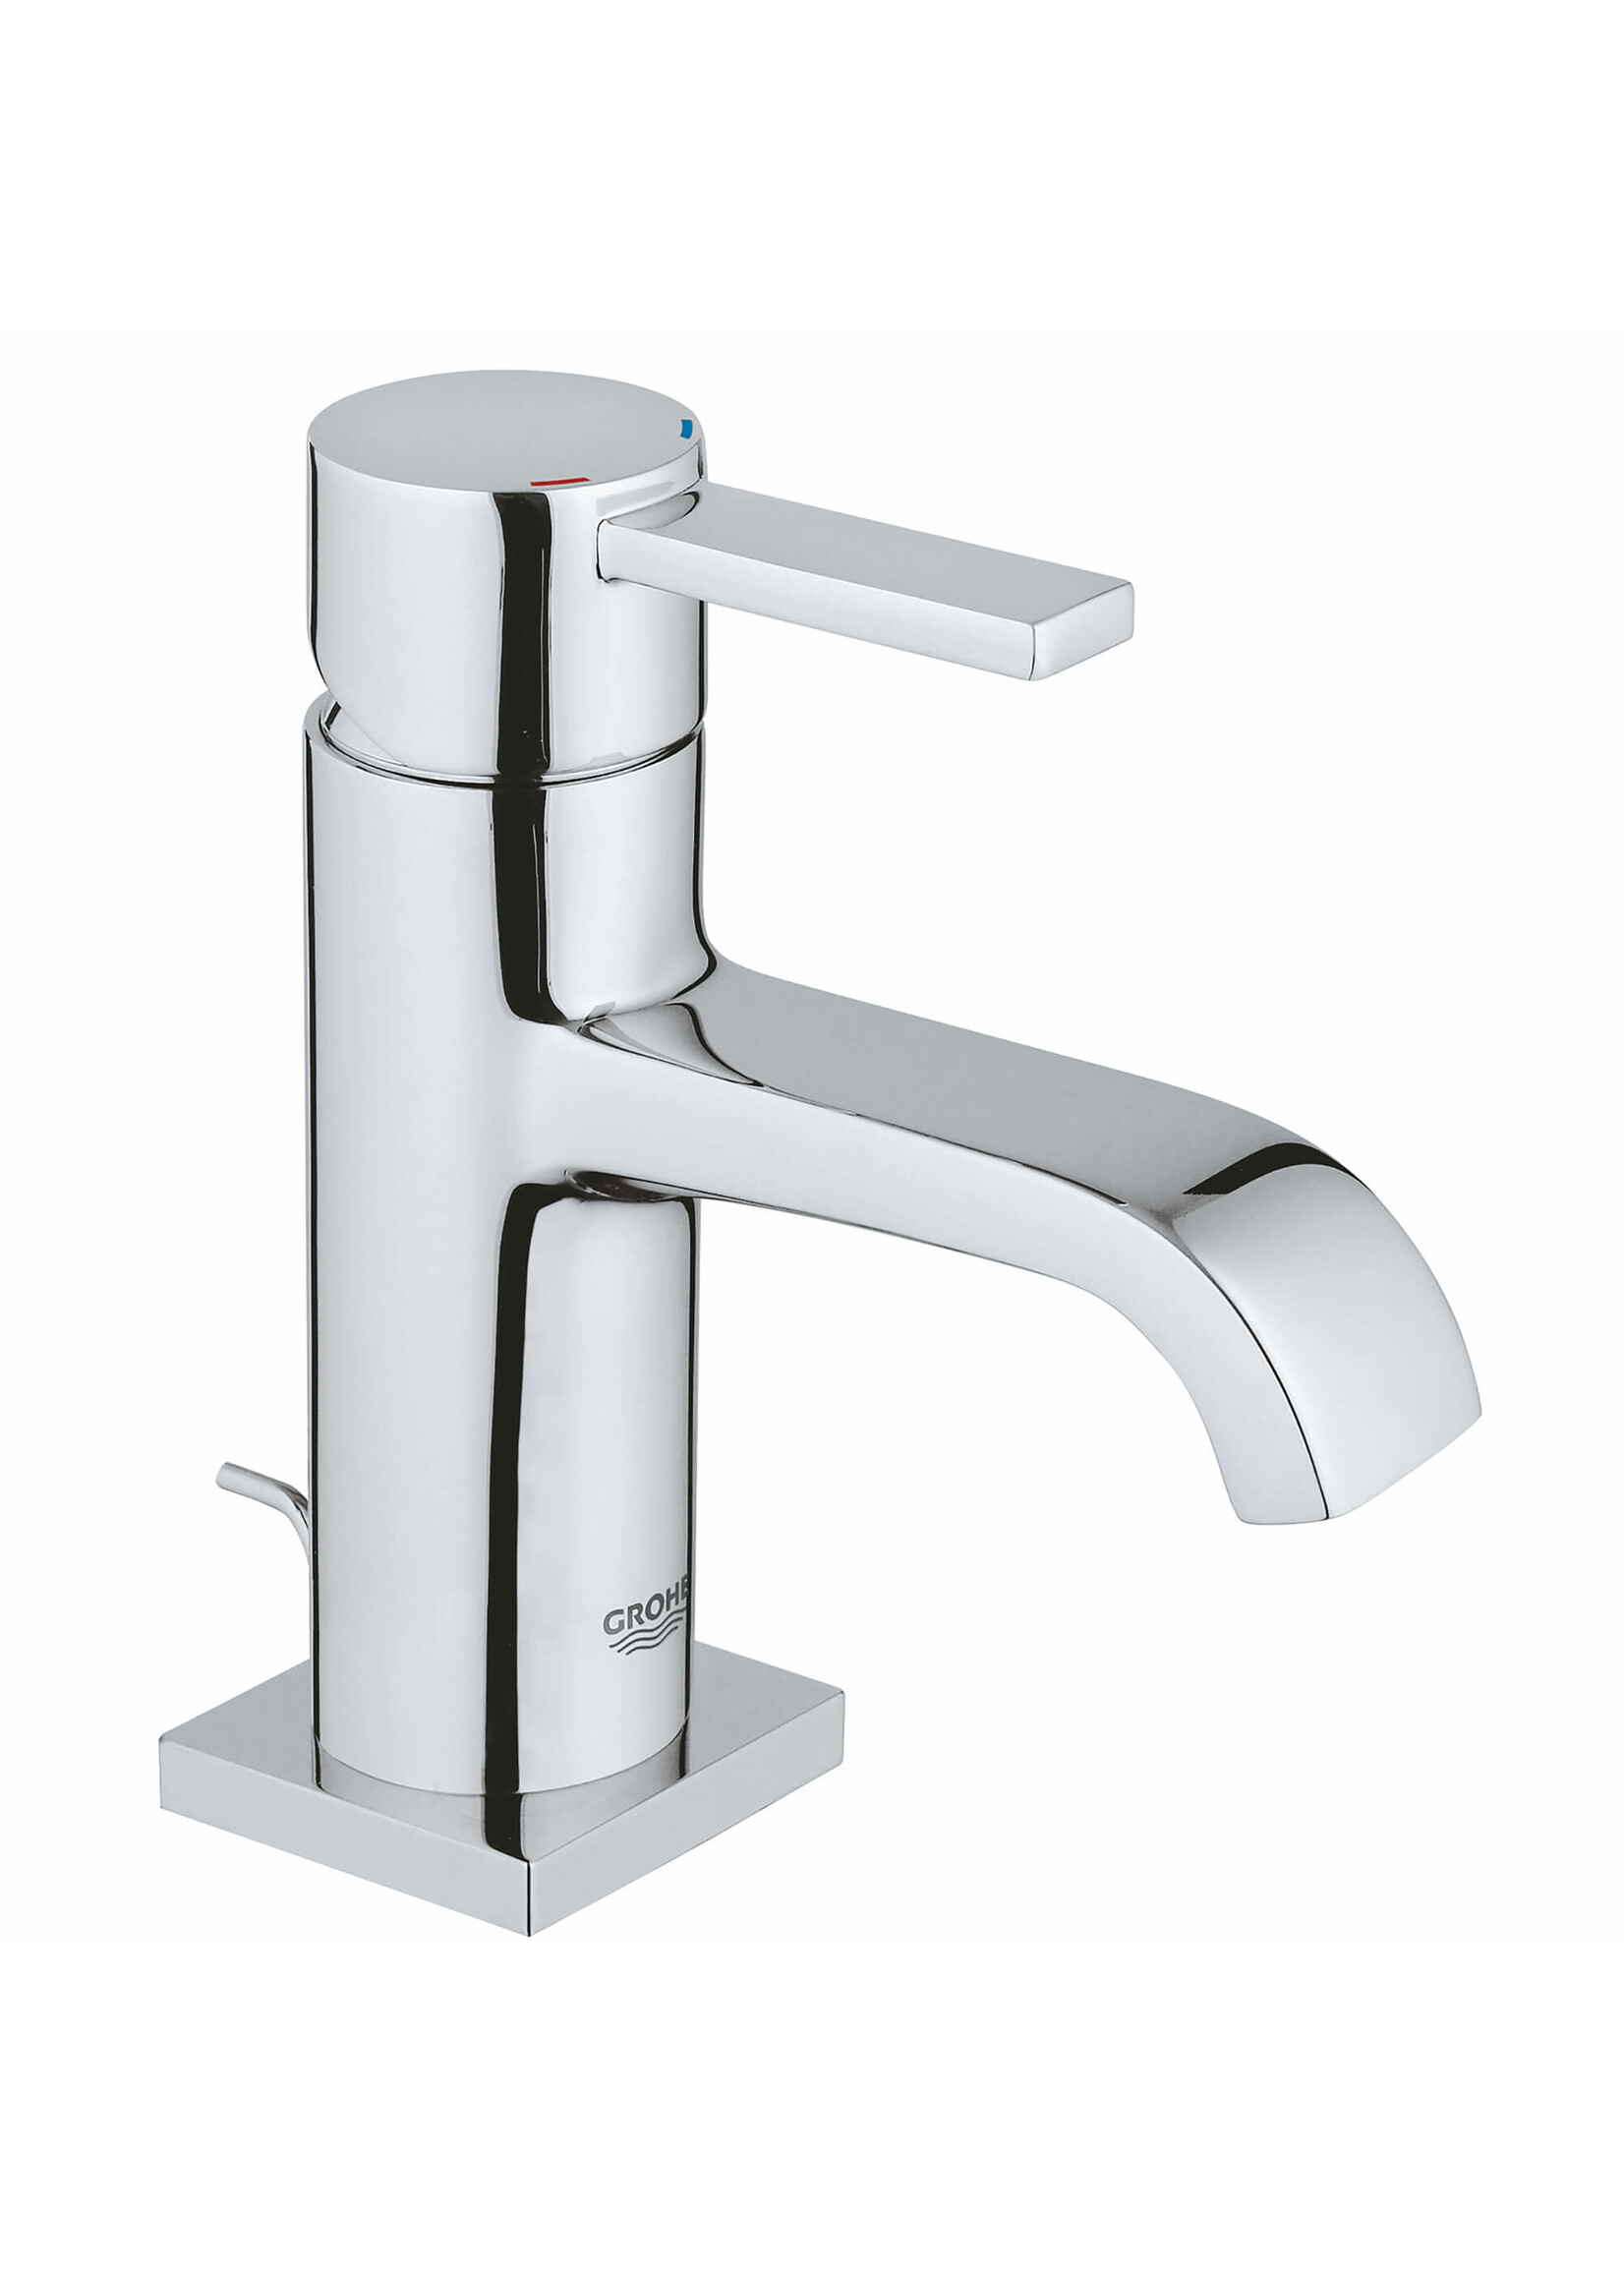 Grohe Grohe Allure Single Handle M-Size Bathroom Faucet - Chrome